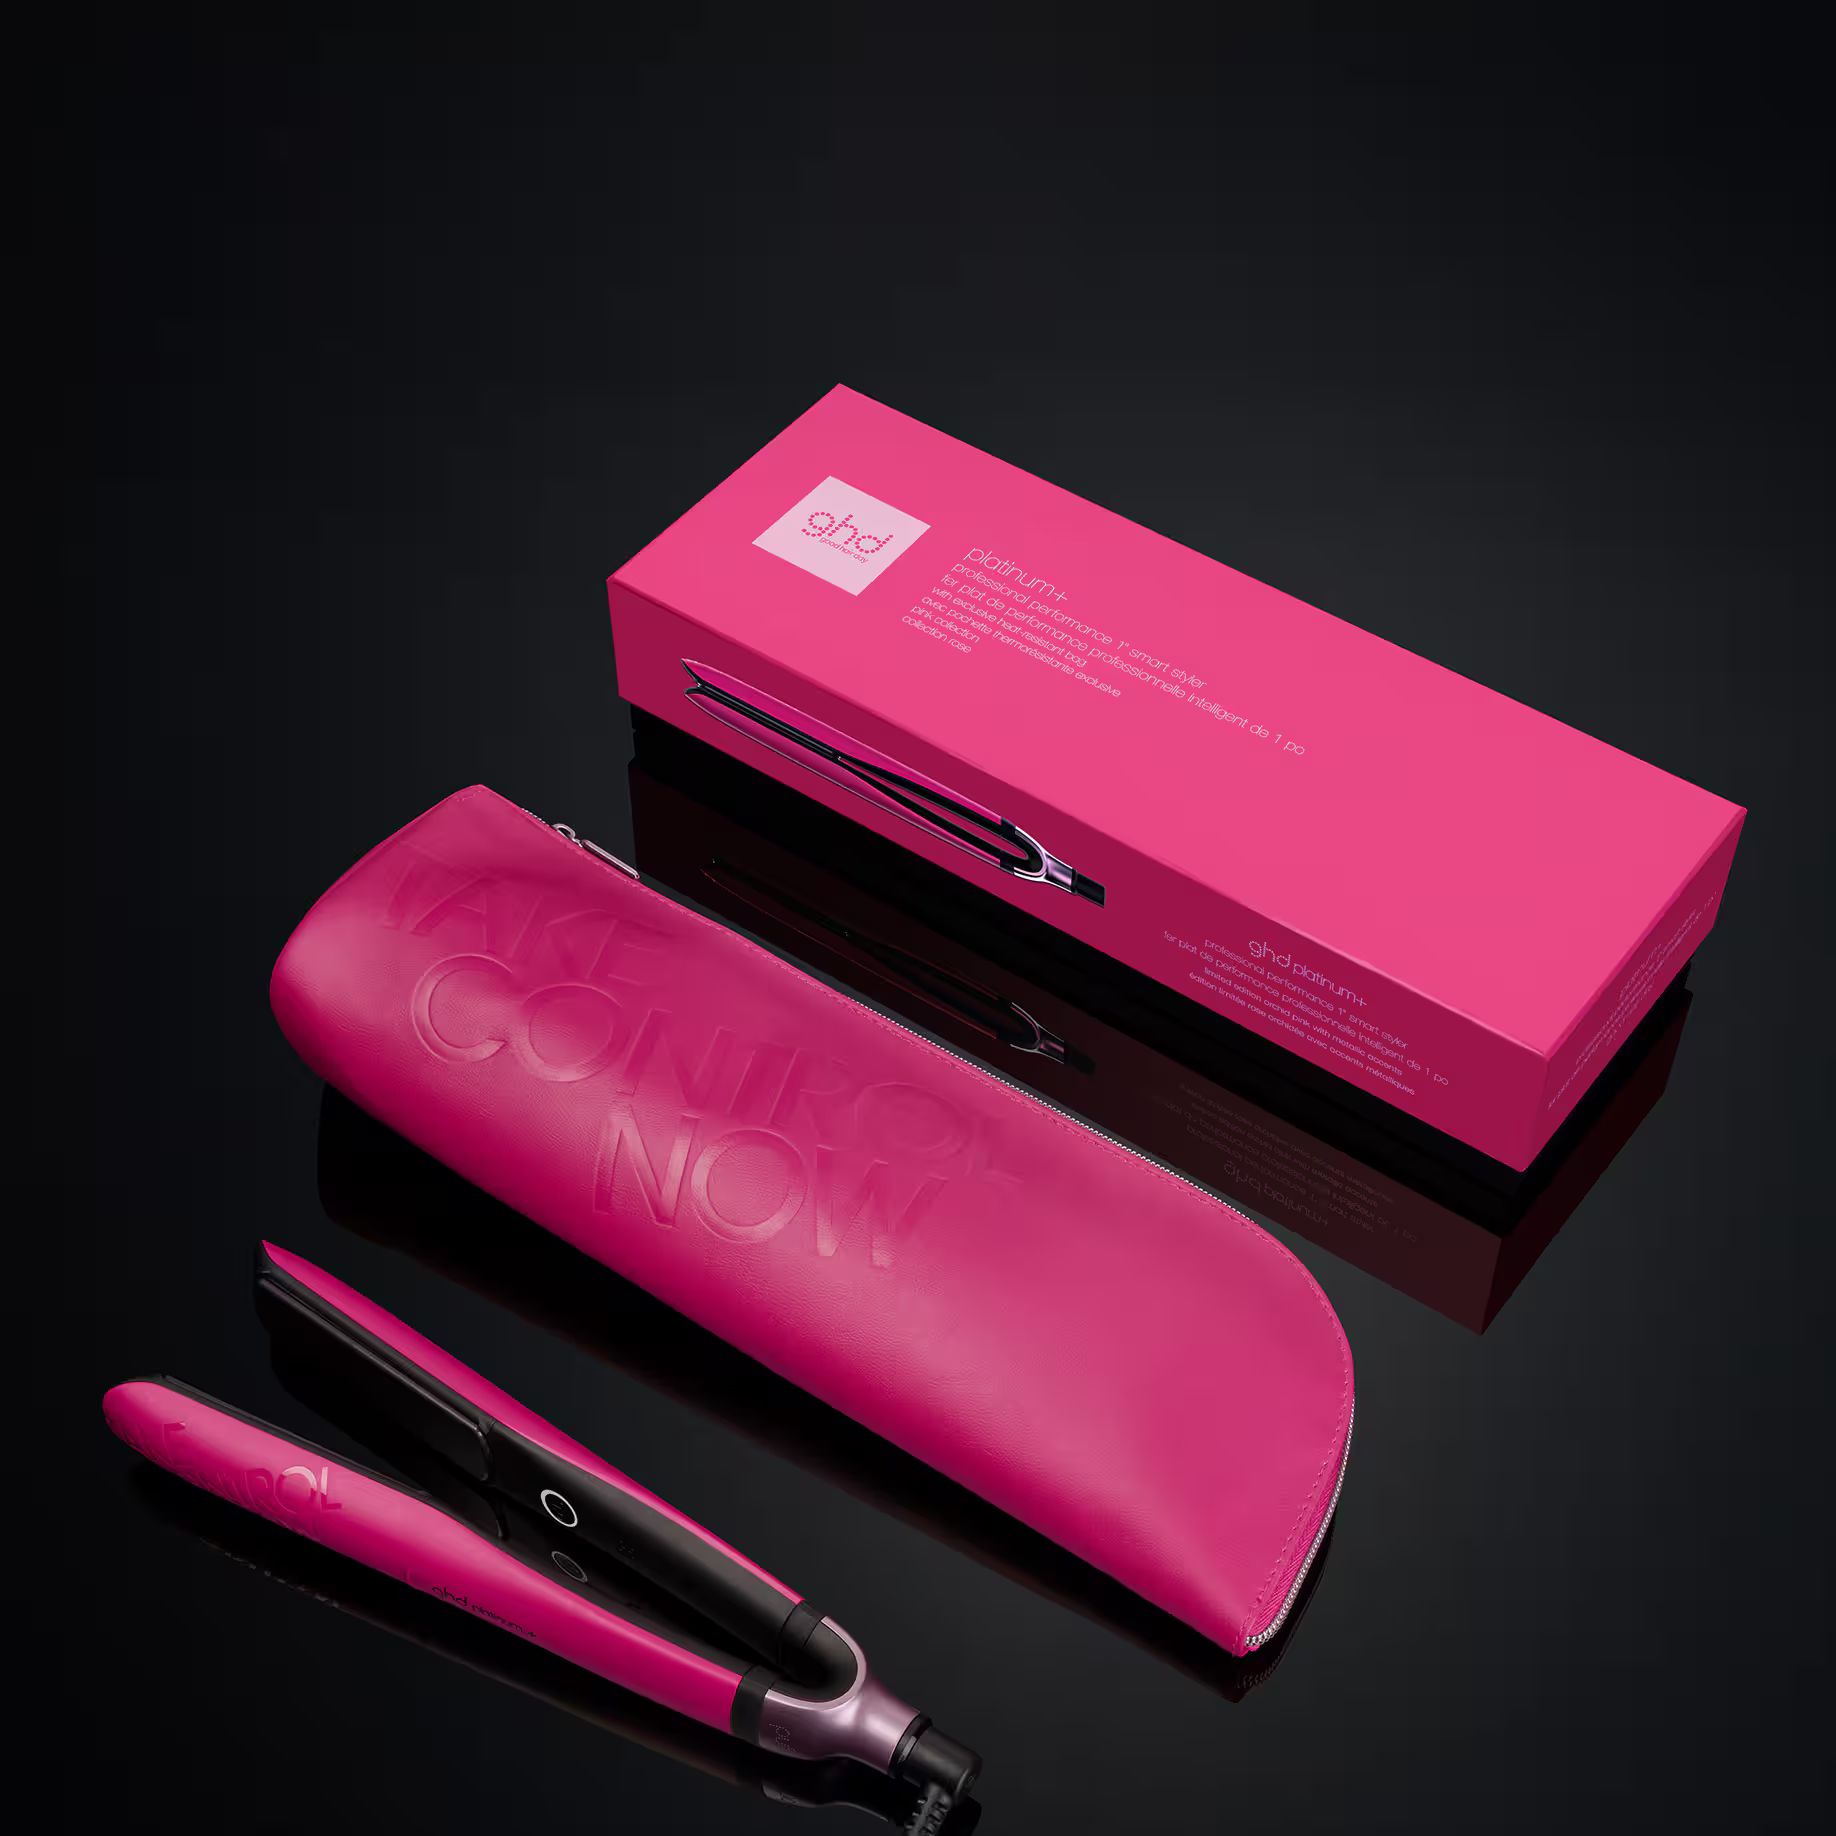 PLATINUM+ STYLER - 1" FLAT IRON, LIMITED EDITION - ORCHID PINK | ghd (US)